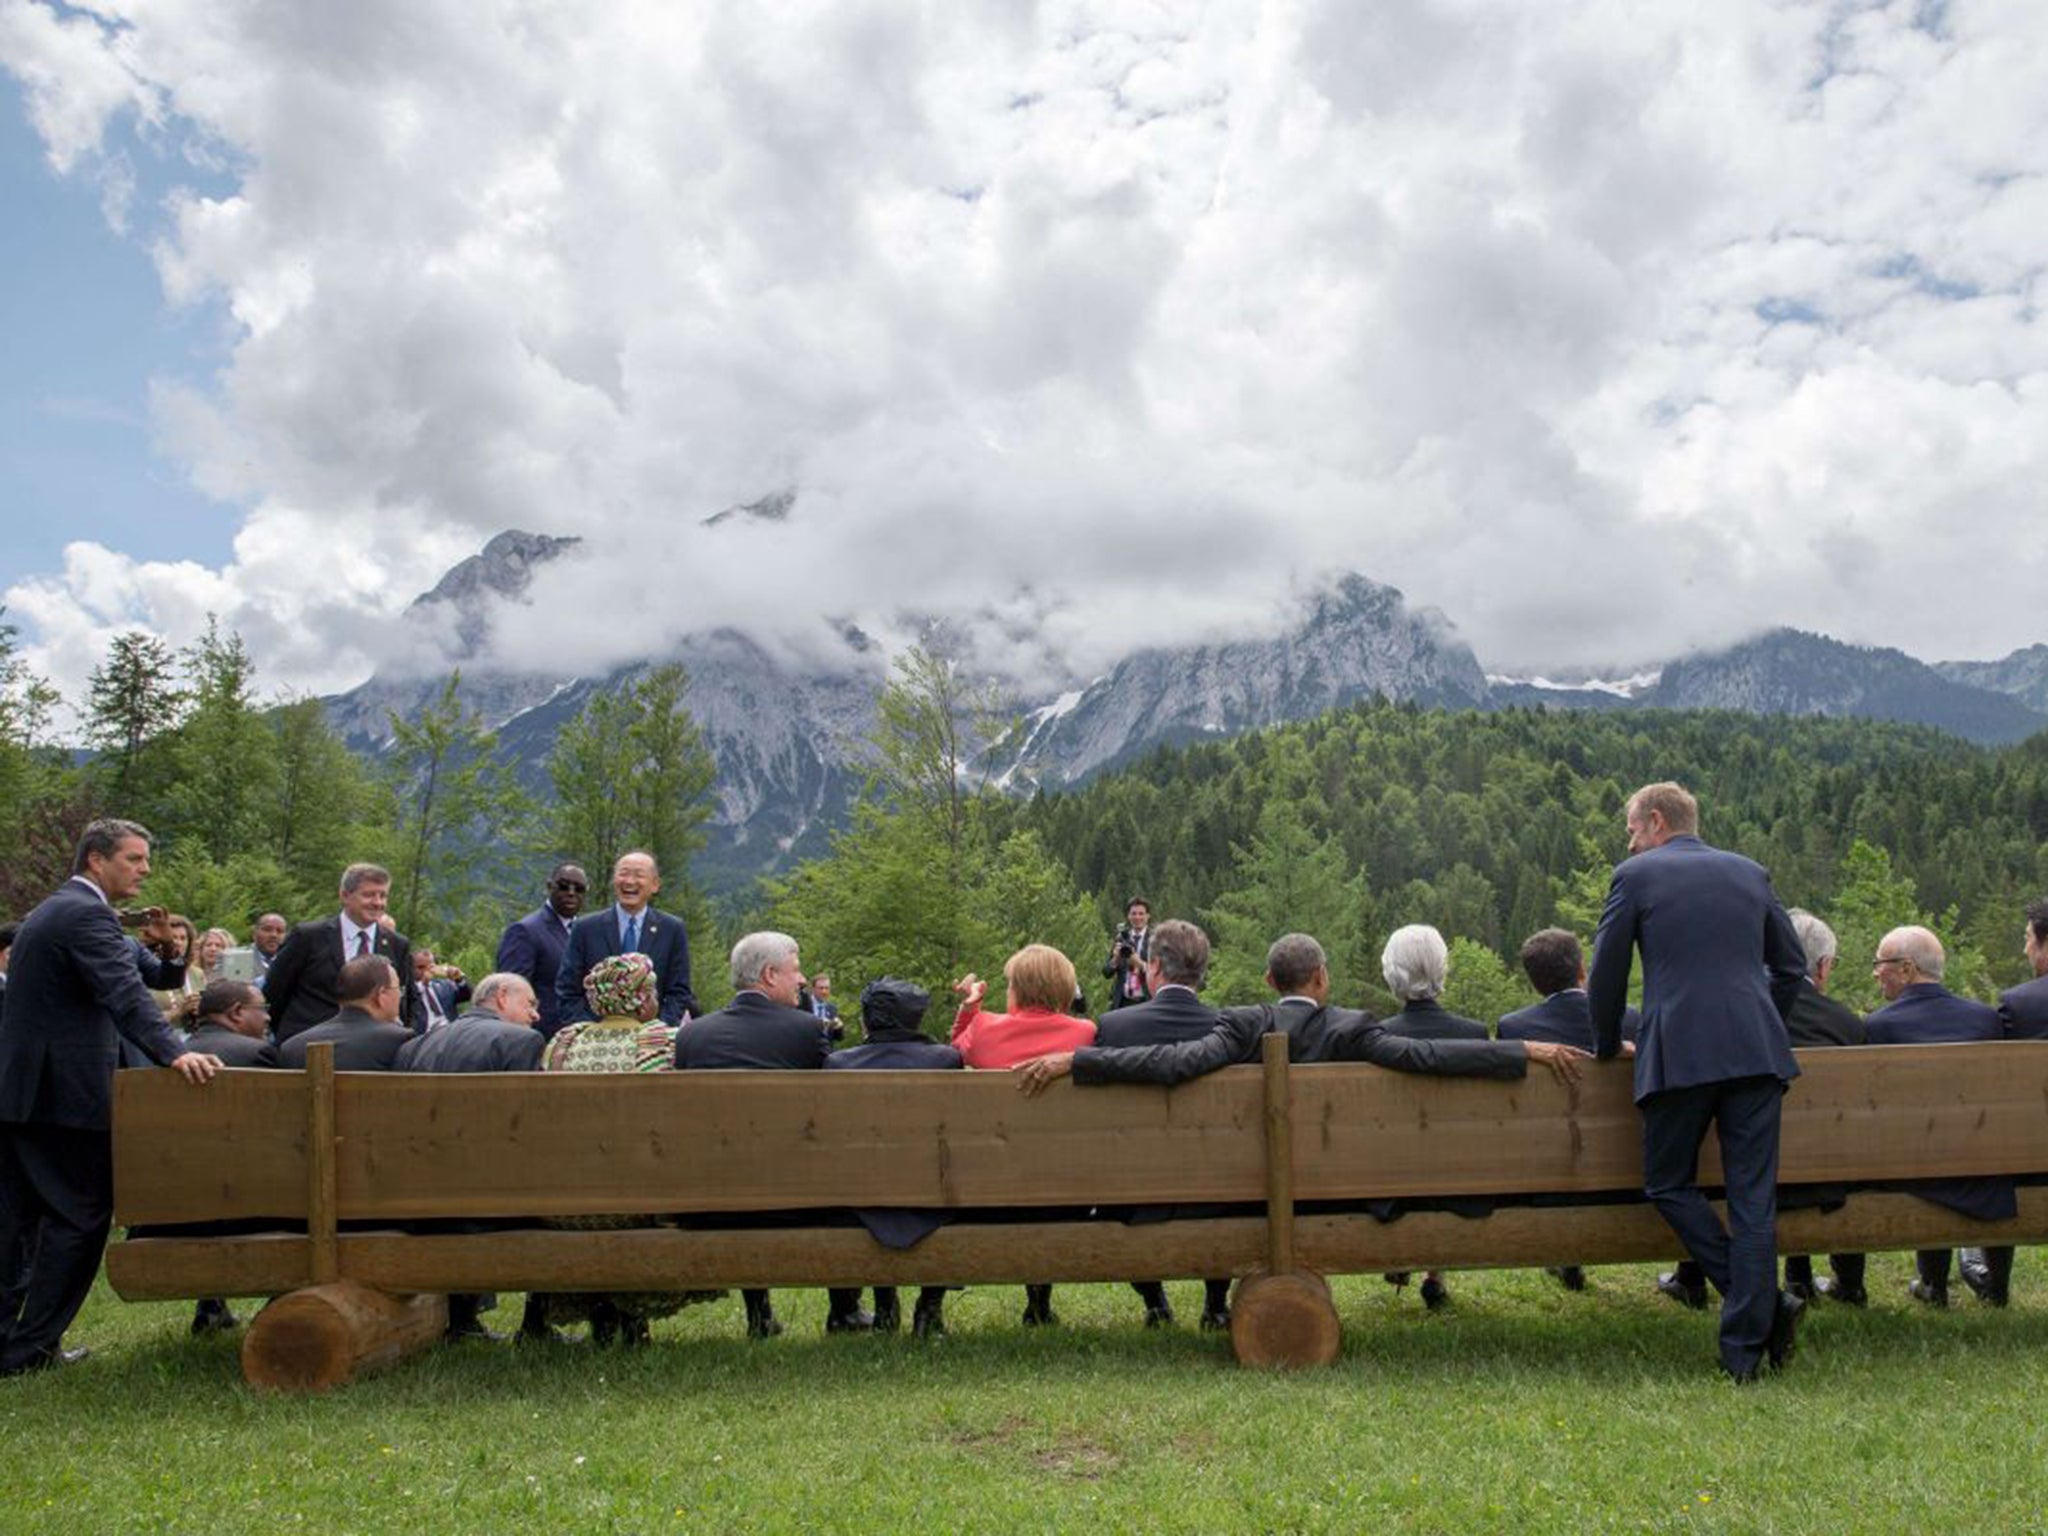 World leaders (including Barack Obama with David Cameron and Angela Merkel to his left, and head of the IMF Christine Lagarde and Italian PM Matteo Renzi to his right) take a break from yesterday’s G7 meetings in Bavaria on Monday